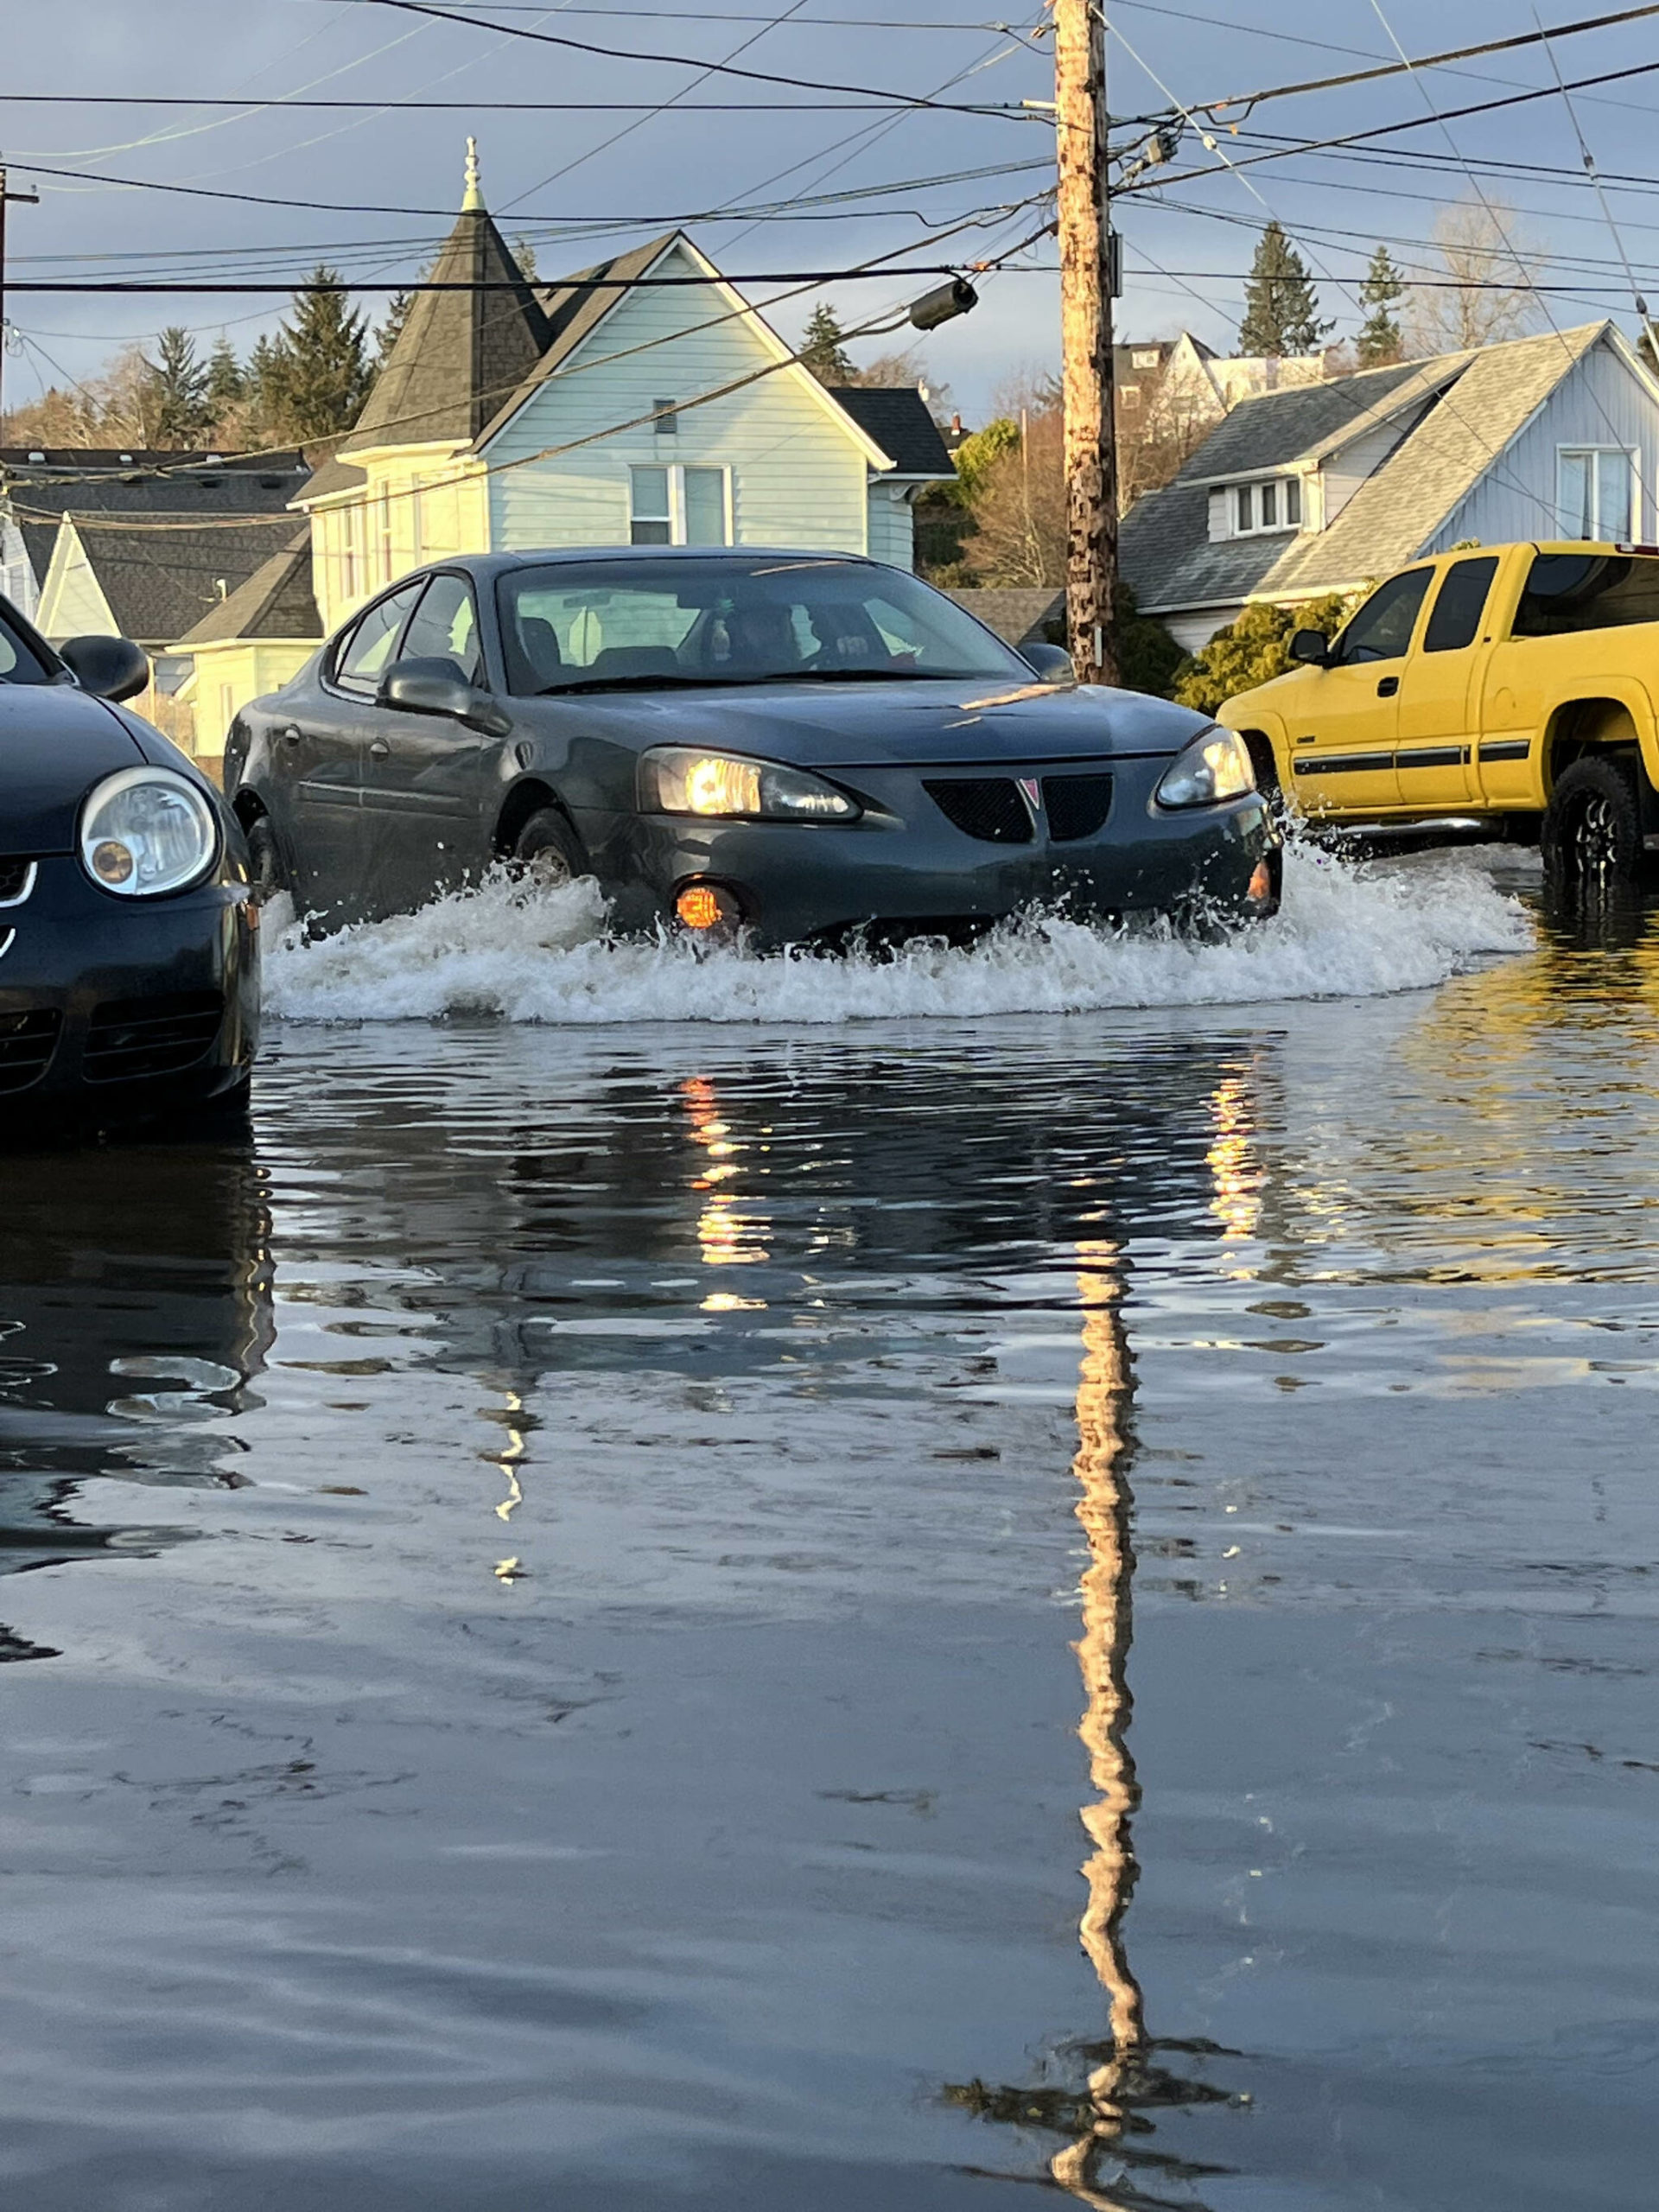 Matthew N. Wells | The Daily World 
A Pontiac sedan causes a wake after high tide on Monday afternoon, Jan. 3, 2022, down East 1st Street and North F Street in Aberdeen. Flooding throughout Aberdeen and Hoquiam caused plenty of turnarounds.